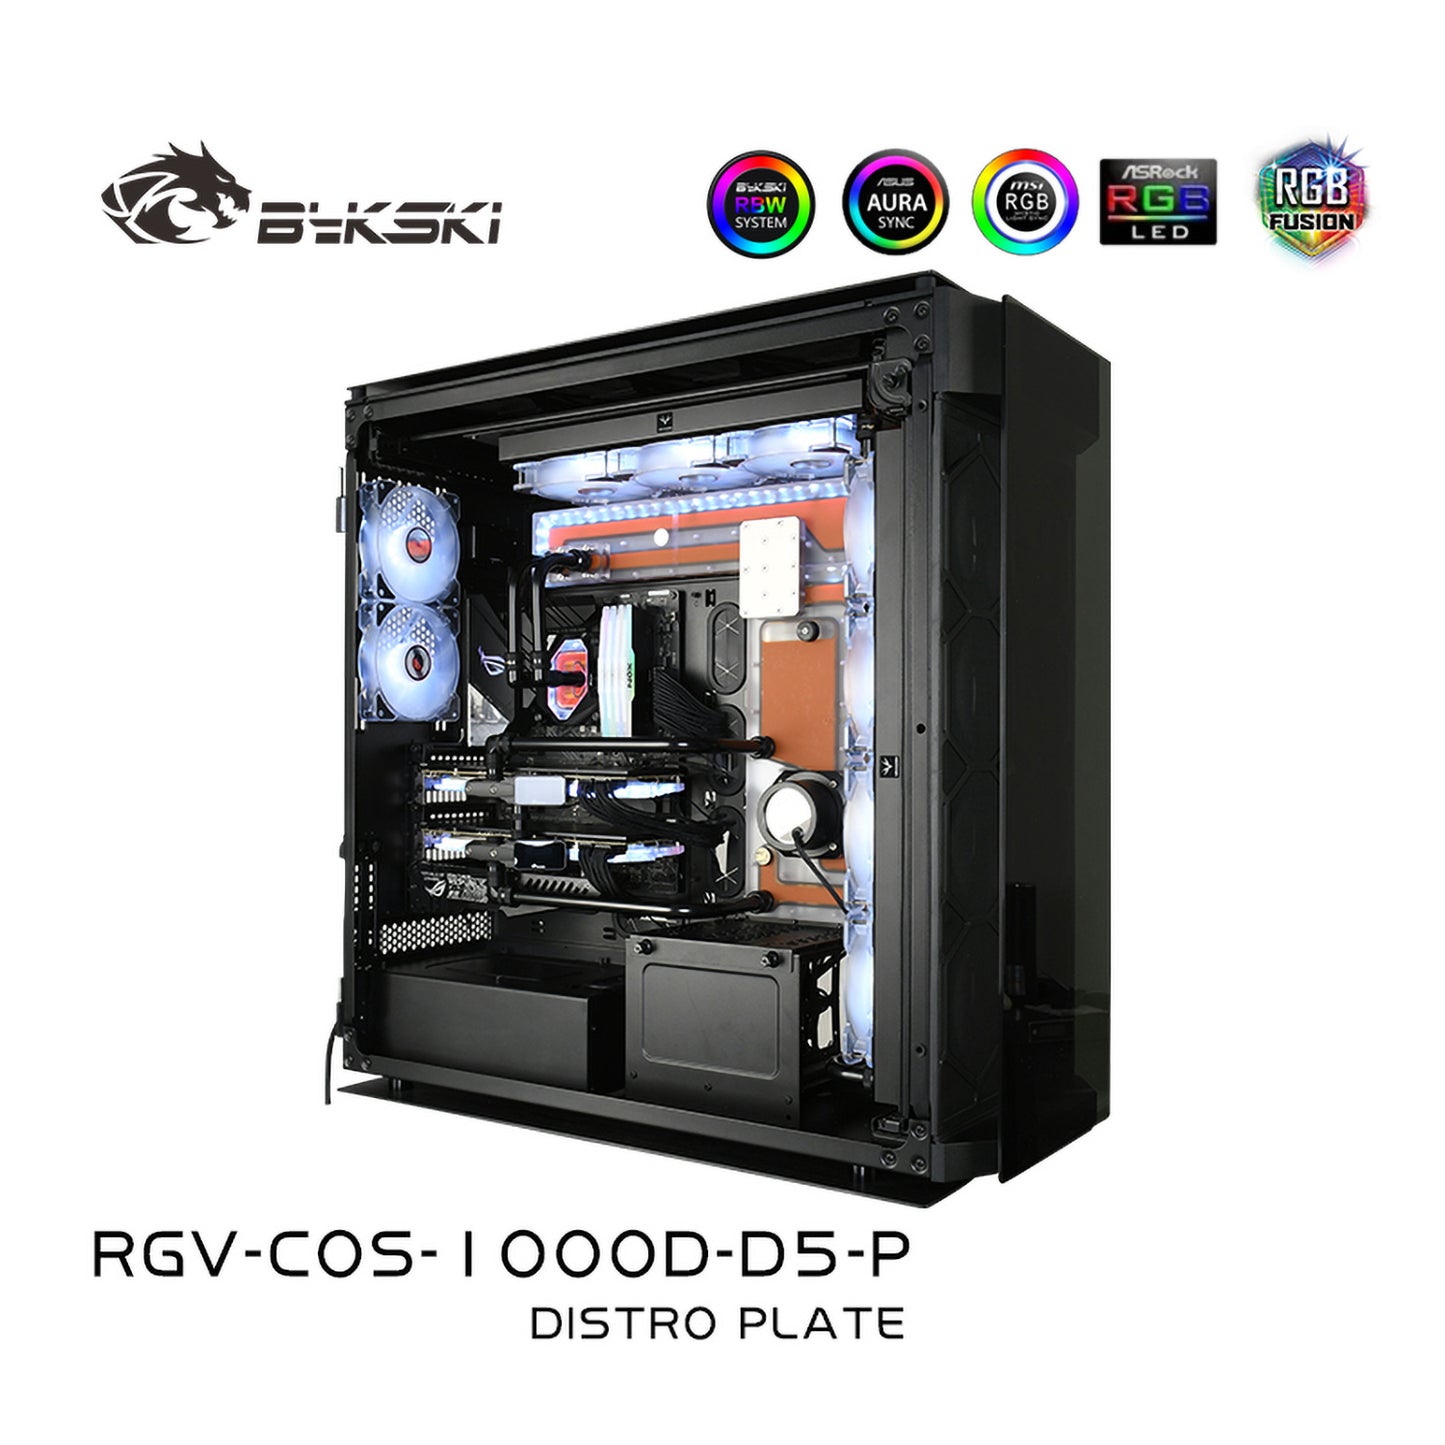 Bykski Distro Plate Kit For Corsair 1000D Case, 5V A-RGB Complete Loop For Single GPU PC Building, Water Cooling Waterway Board, RGV-COS-1000D-D5-P